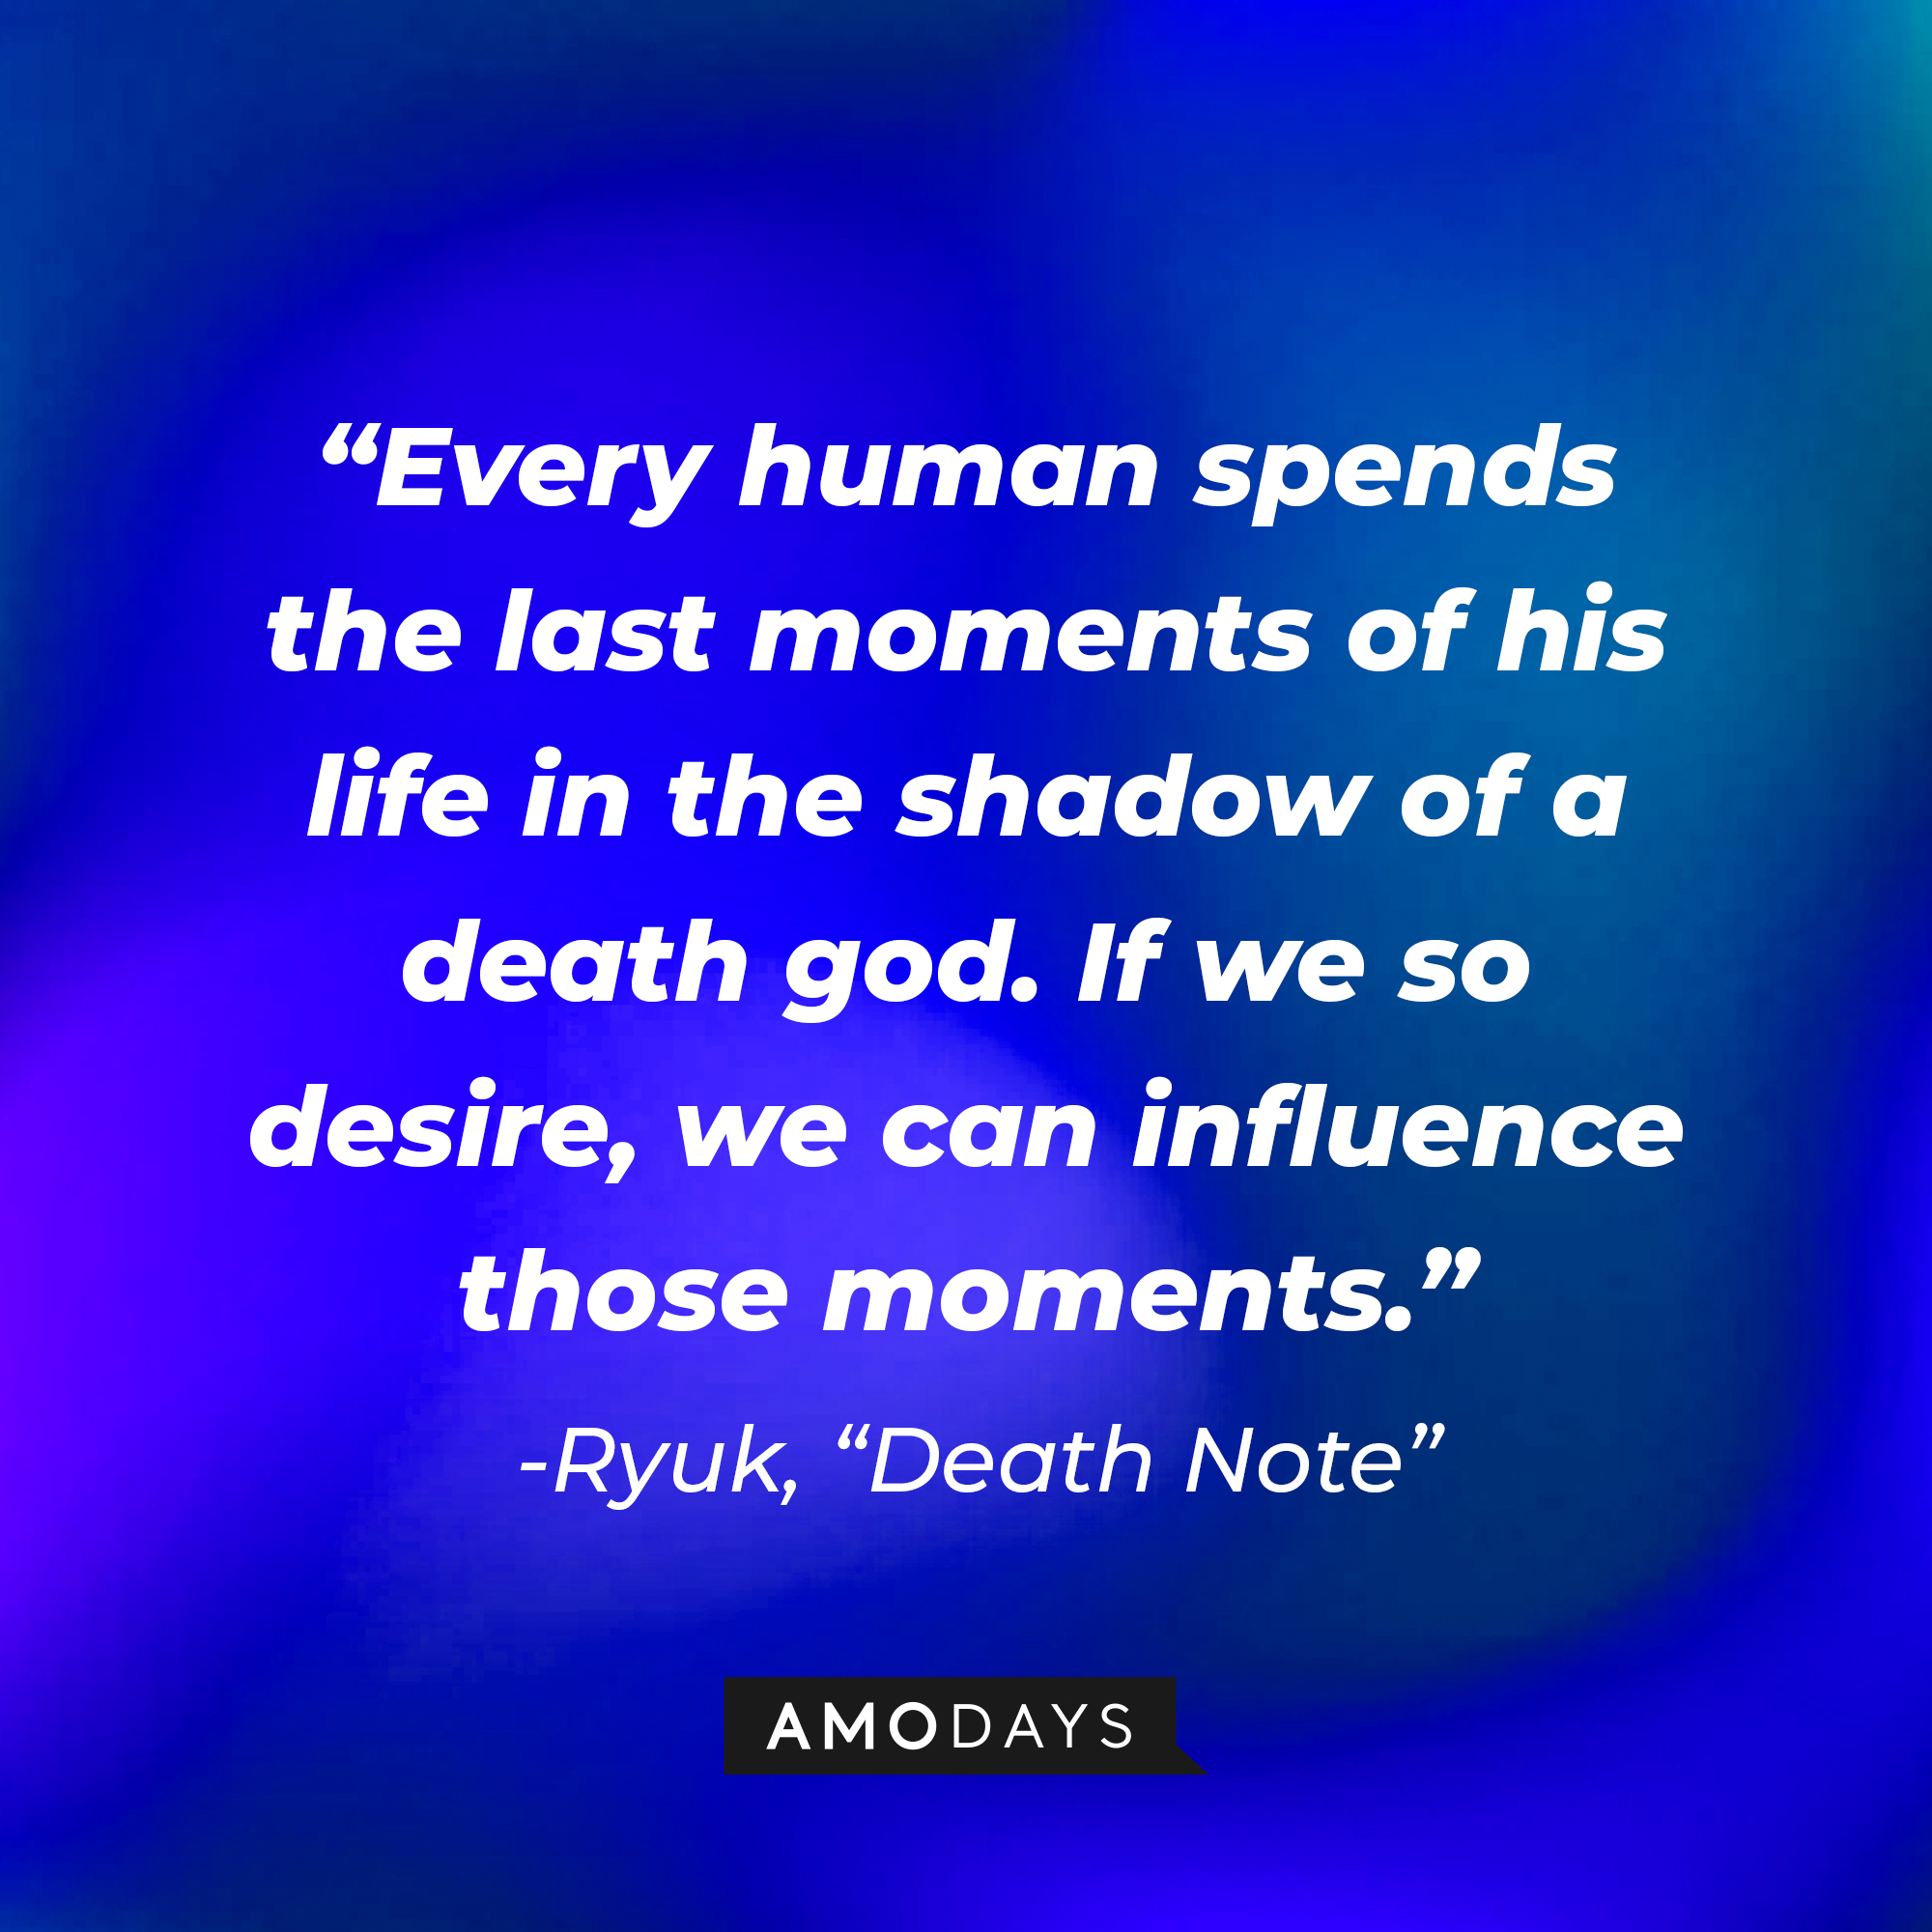 Ryuk's quote from "Death Note:" "Every human spends the last moments of his life in the shadow of a death god. If we so desire, we can influence those moments." | Source: AmoDays